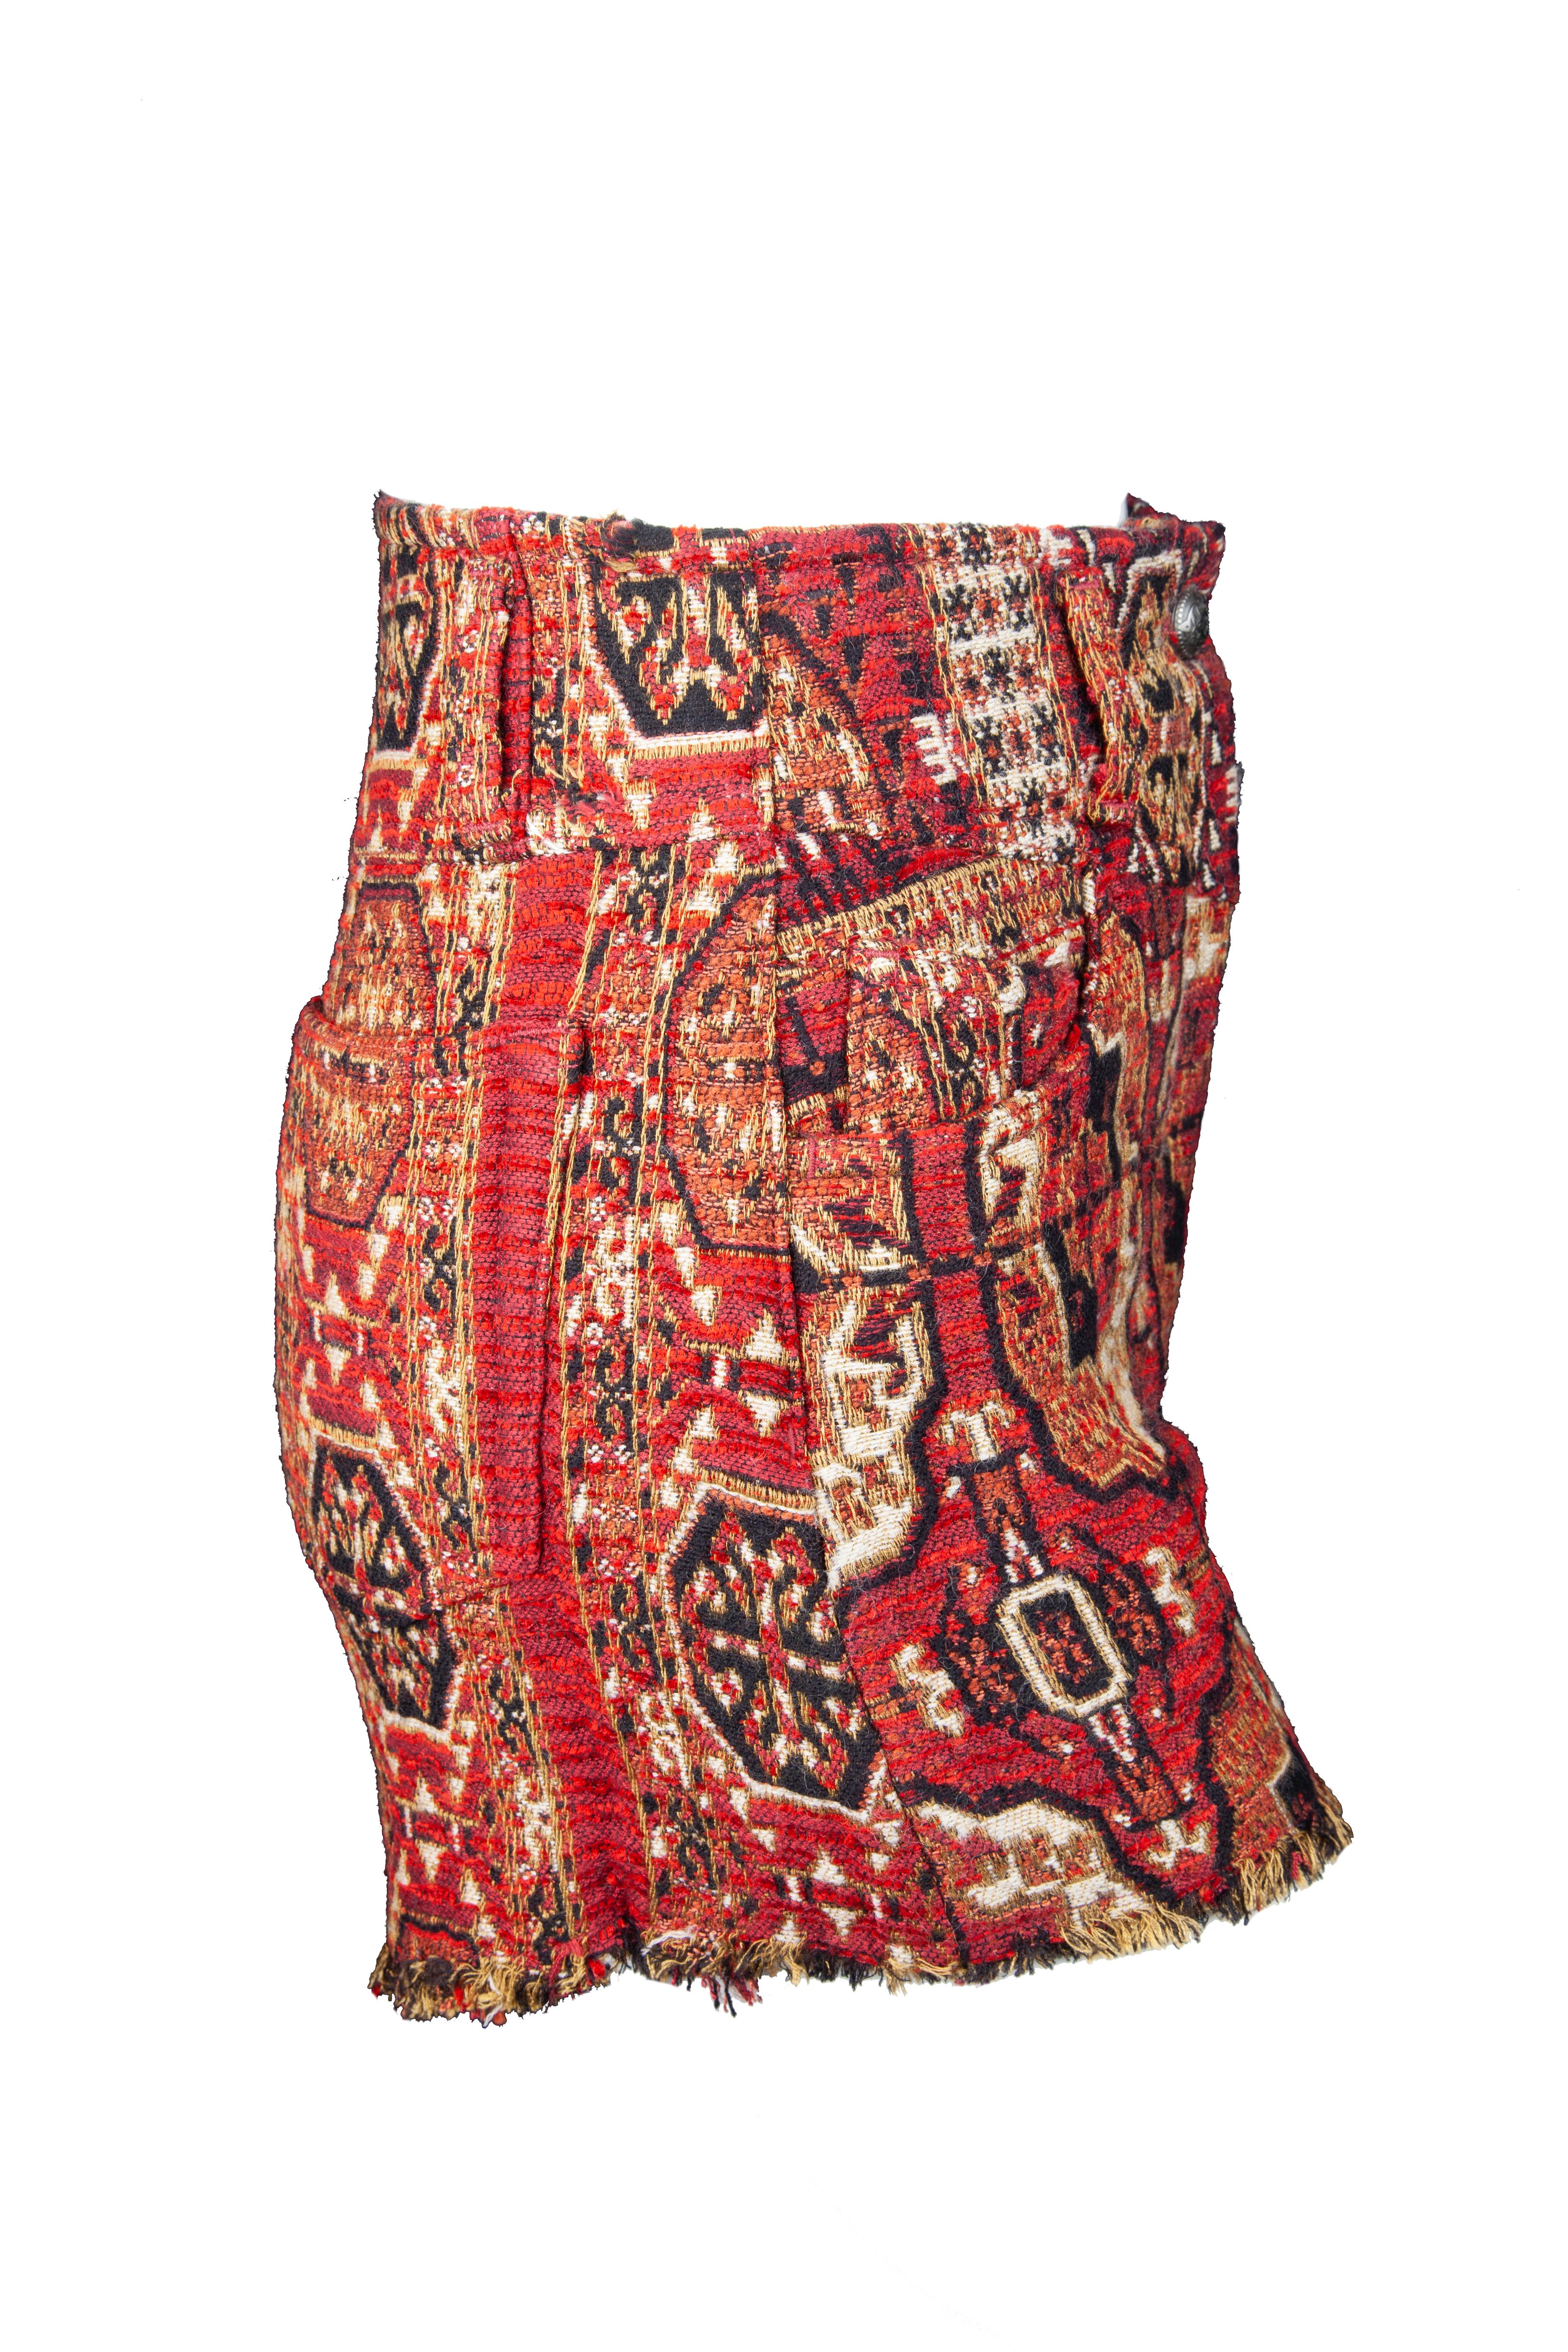 The Etro Fall 2019 Runway red shorts feature a jacquard tile print, a zipper/button closure, pockets, and a lightly fringed hem. Brand new with tags. Made in Italy.

Sizes Available: 26

Measurements :
Outer Length: 12.5 in
Total Length: 16